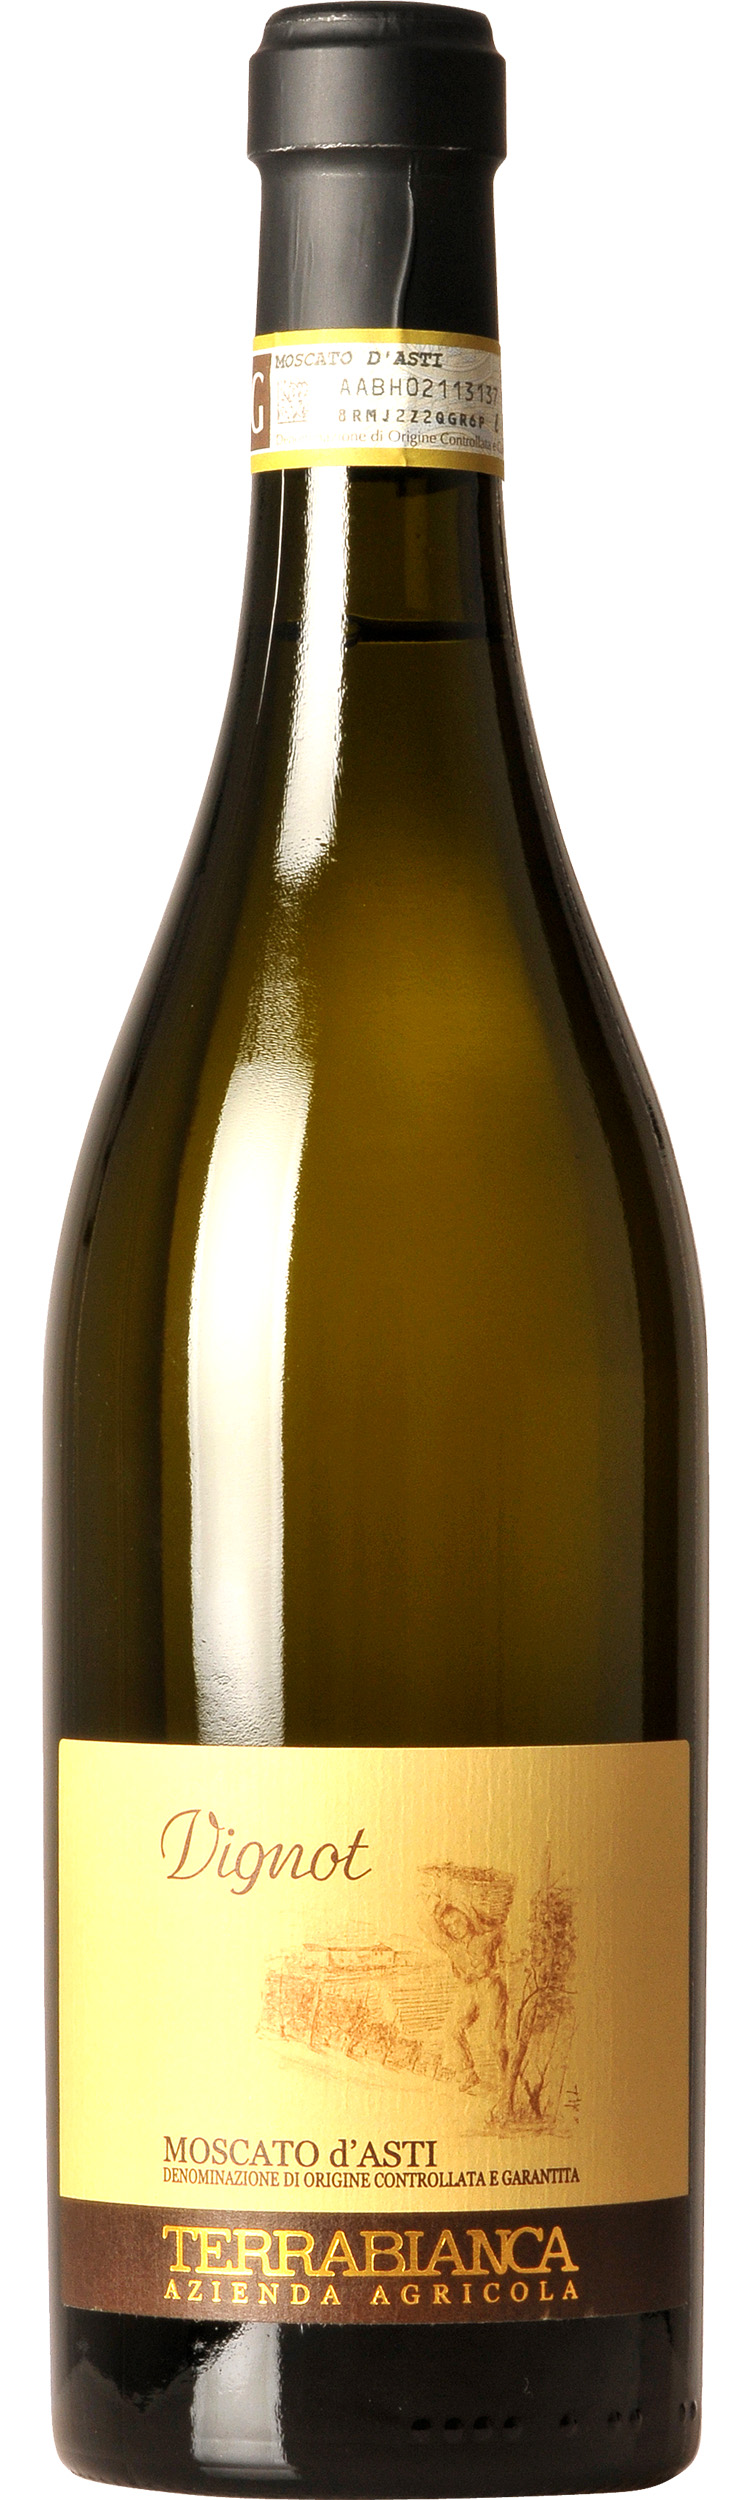 Vignot - Moscato d'Asti D.O.C.G. Canelli